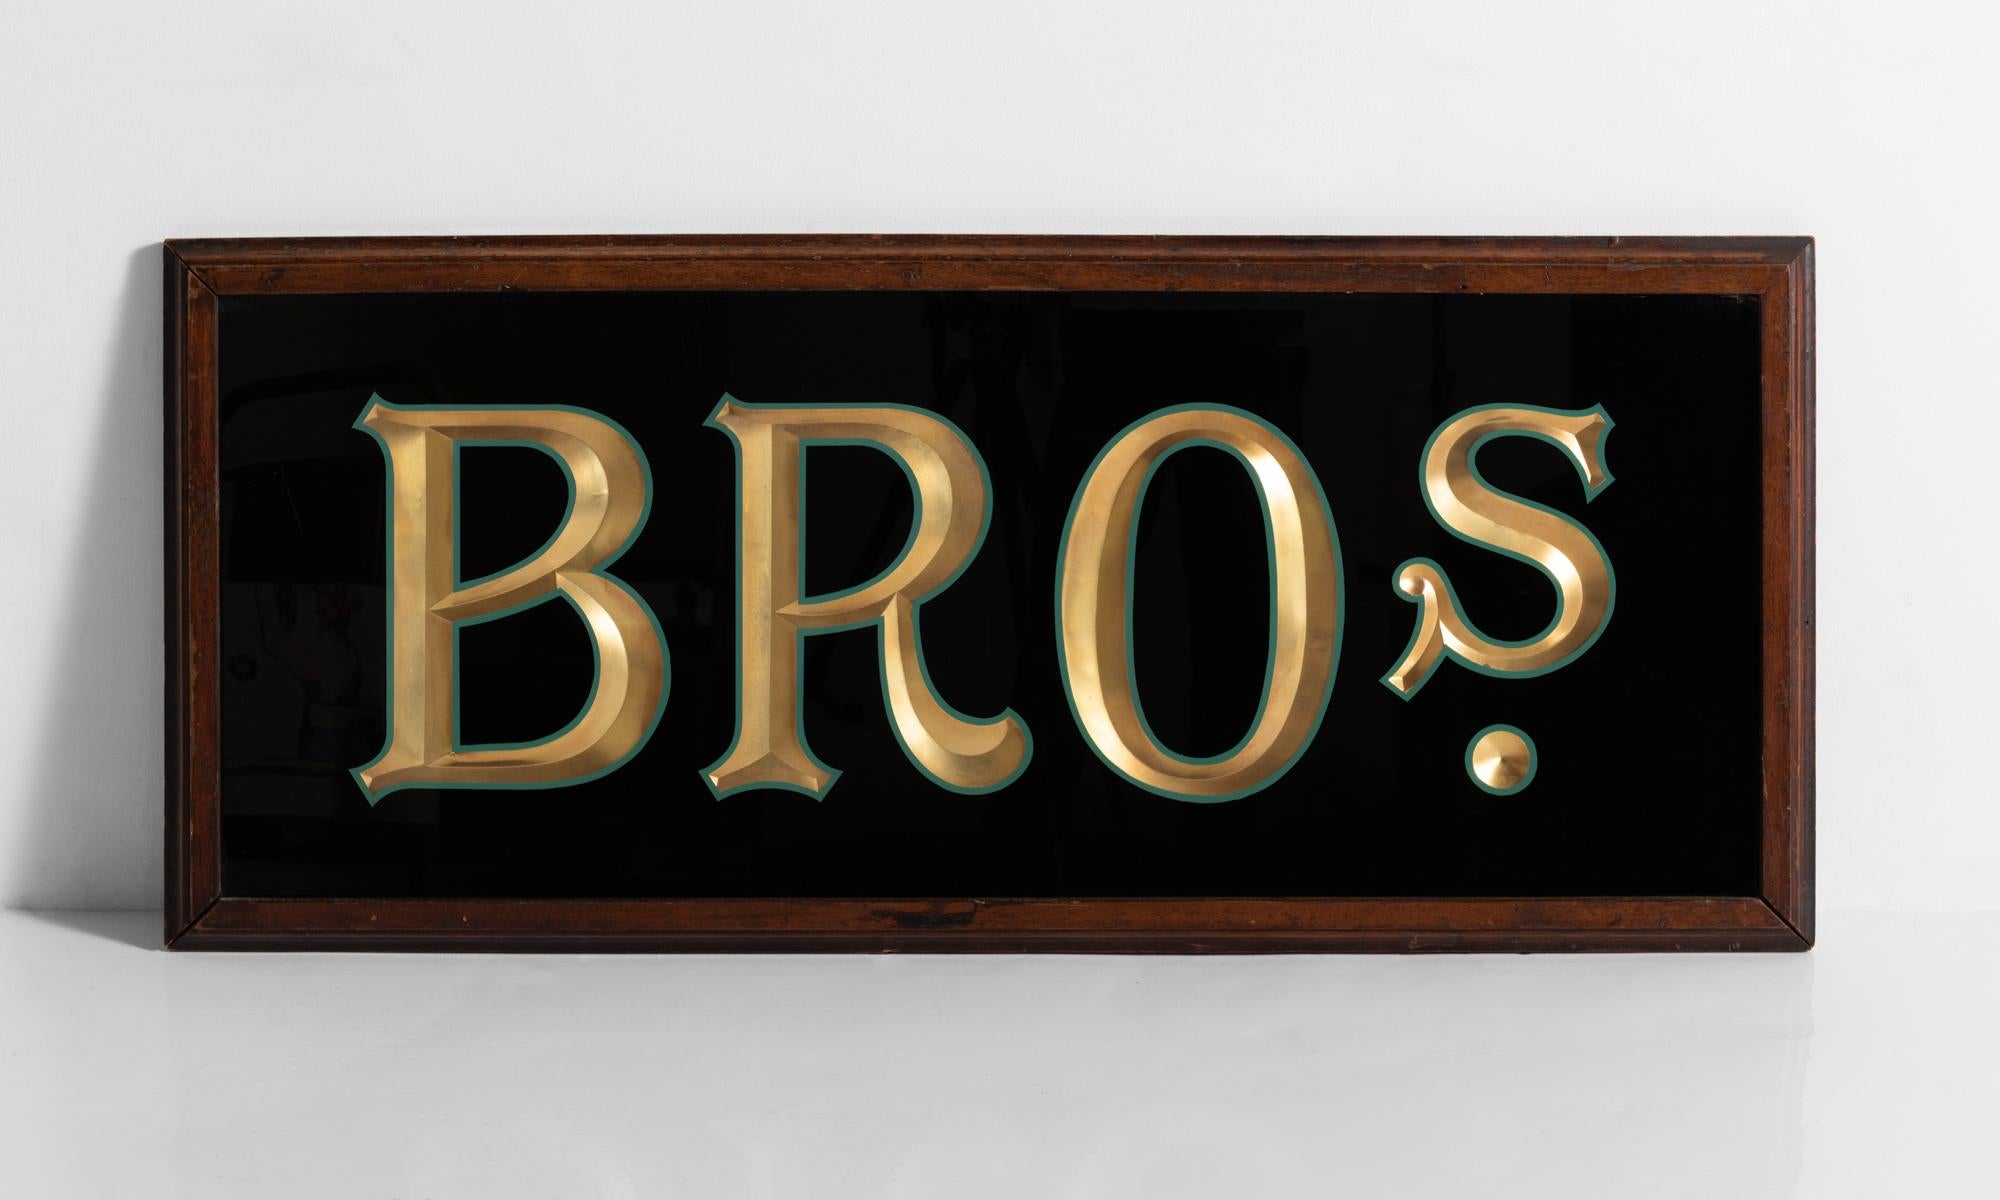 Reverse painted Bros sign, circa 1950.

Glass sign with beveled and hand painted detailing in wooden frame.